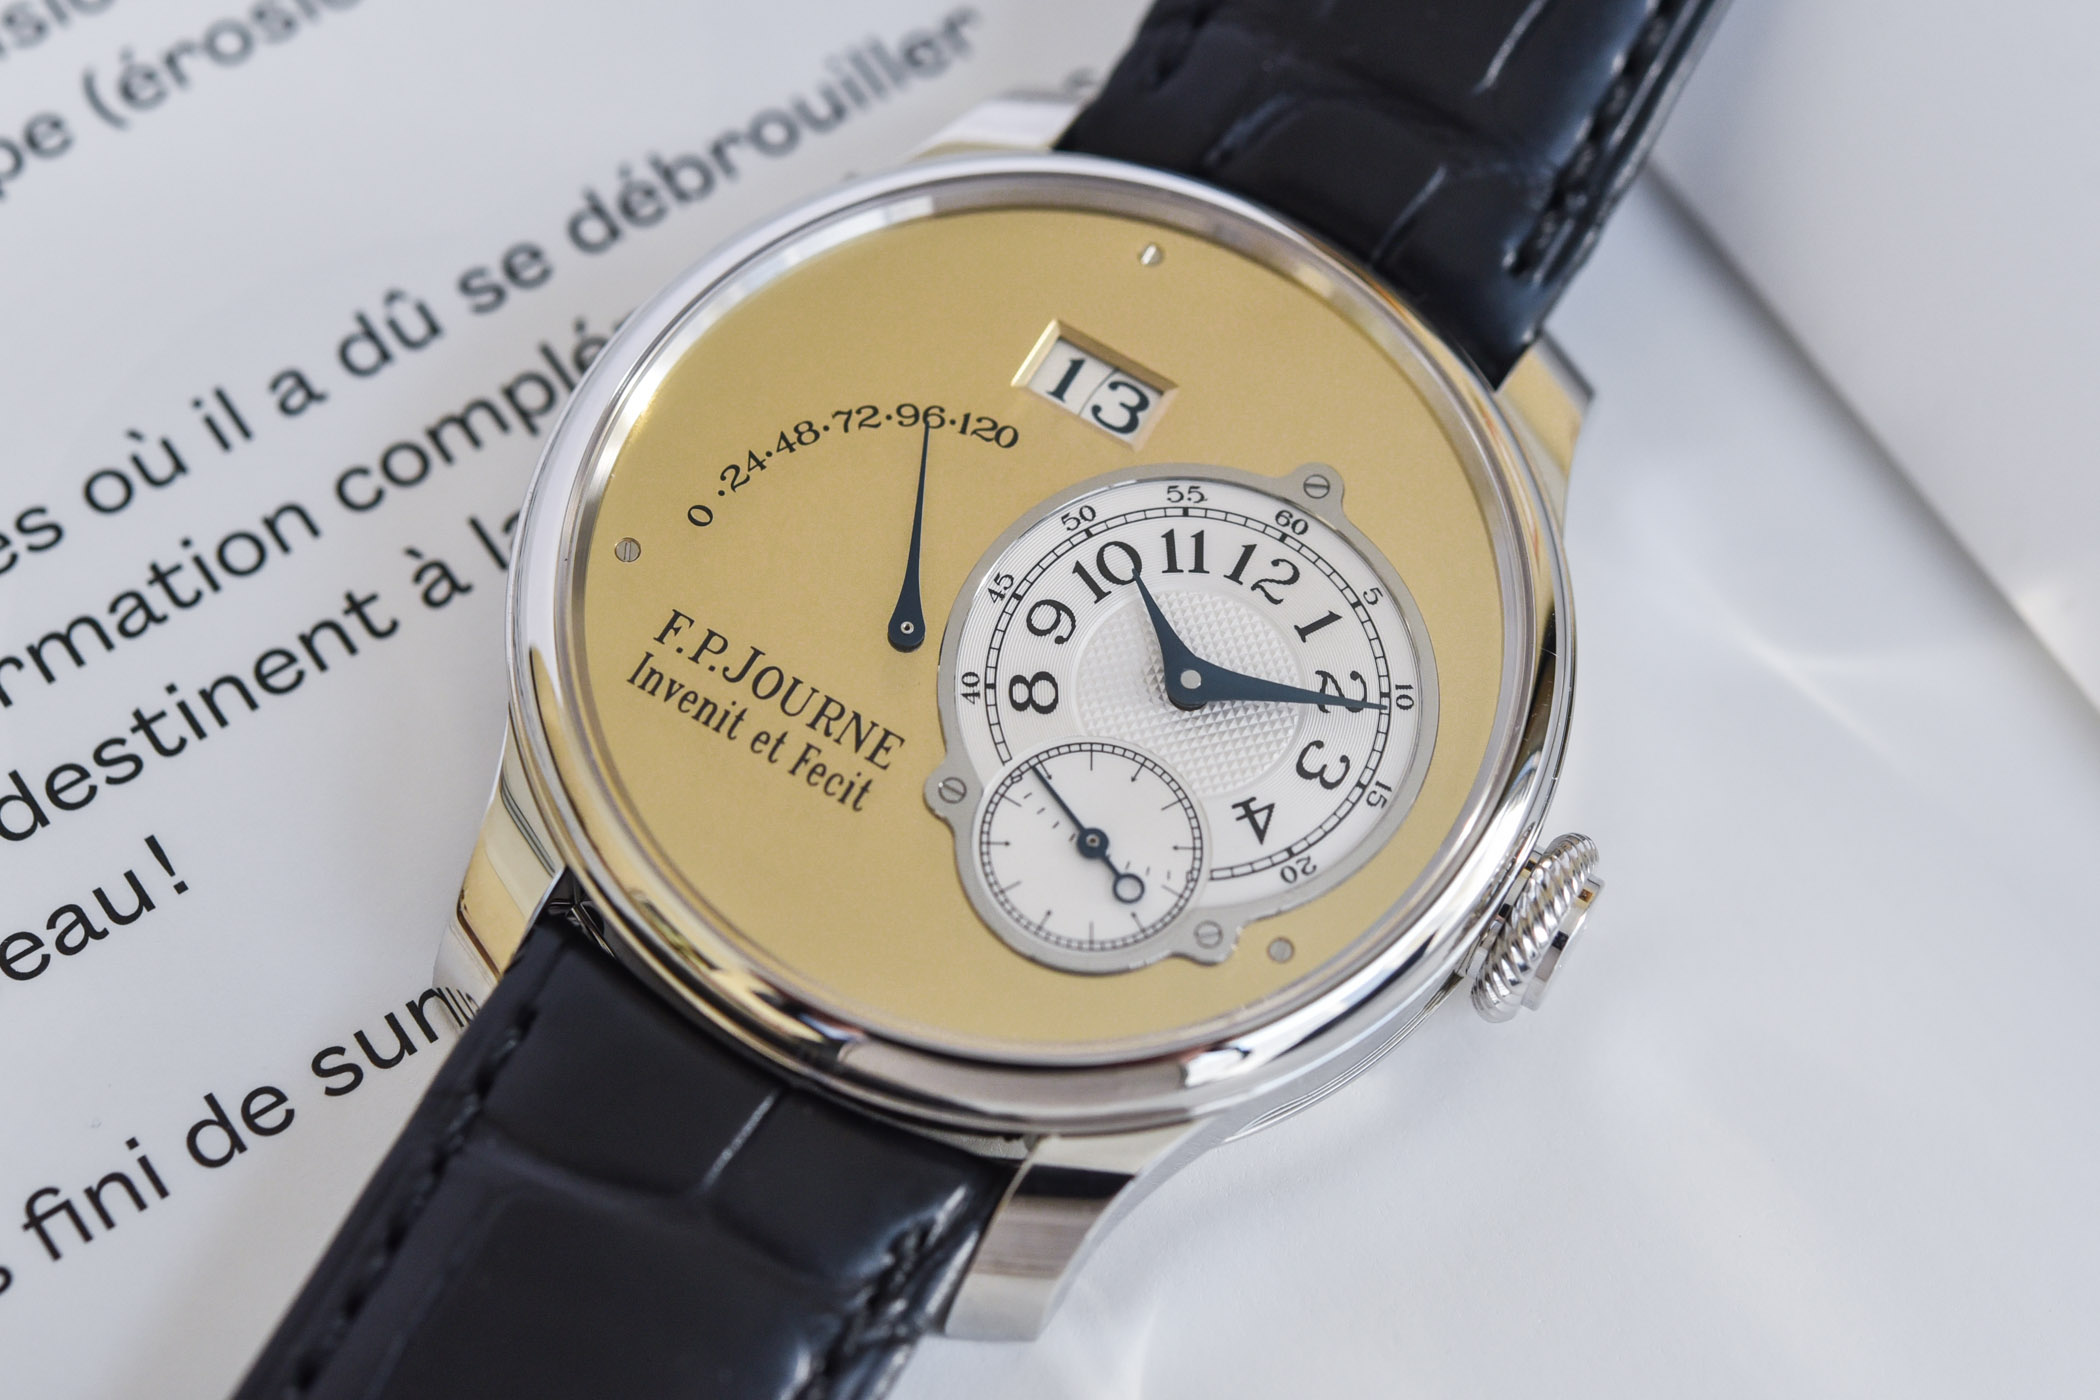 FP Journe Automatique Limited Edition 20th anniversary Octa - review - 10